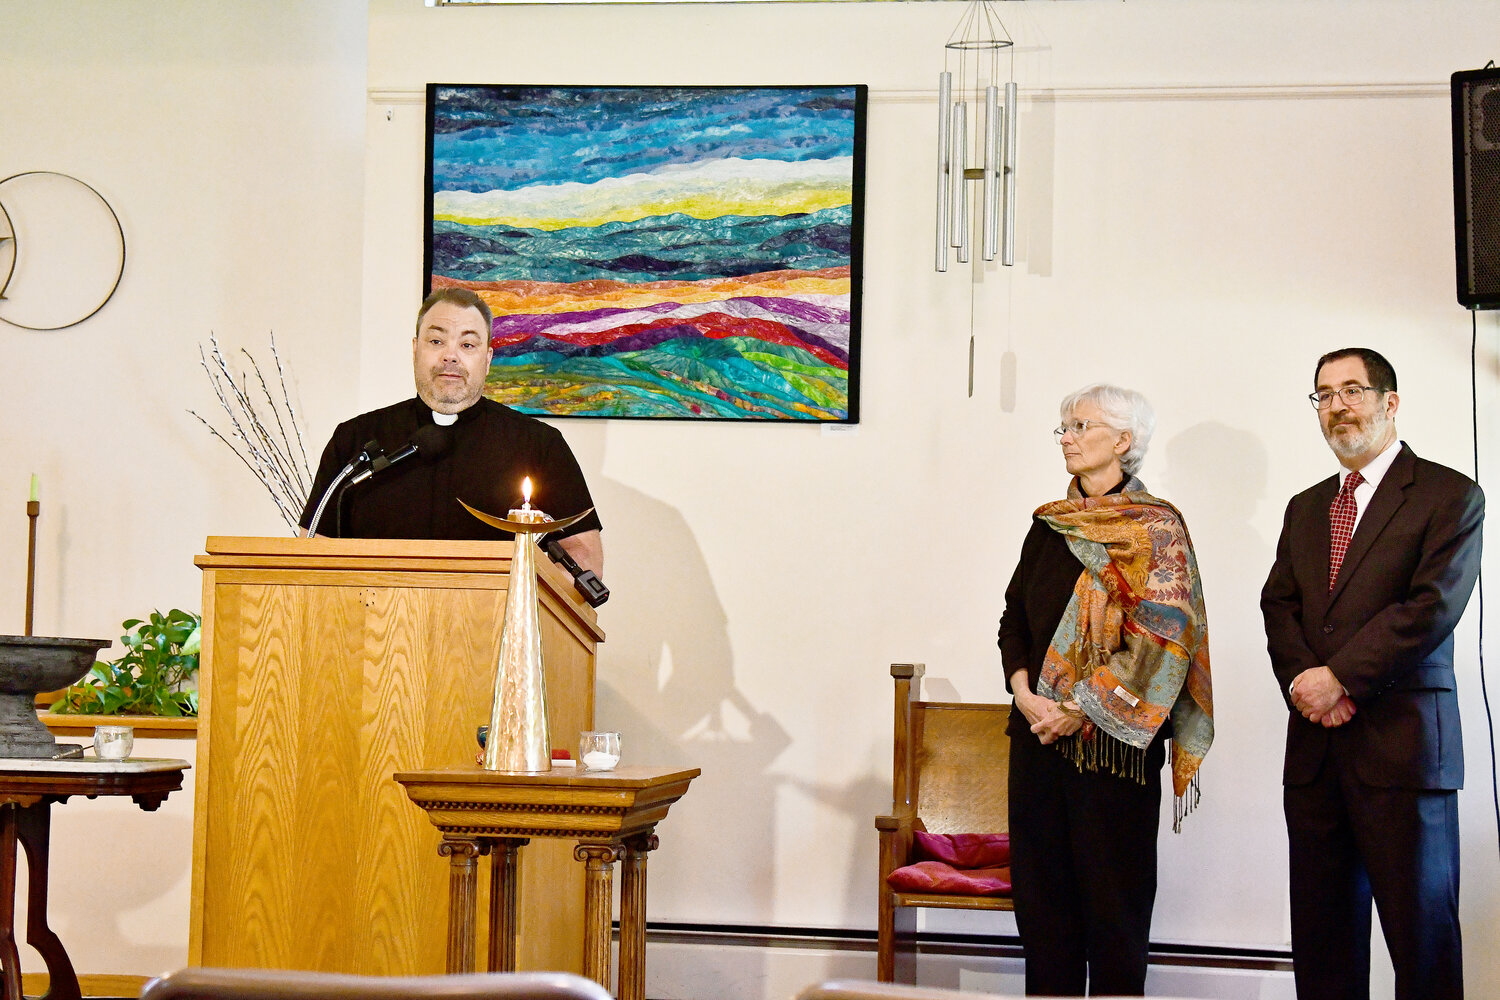 From left, Rev. Michael Ballman of Cornerstone Community Church, speaks out about Oneida County’s housing ban for migrants, while Rev. Karen Brammer of the Unitarian Universalist Church of Utica and Rabbi Peter Schaktman of Temple Emanu-El, stand in support.